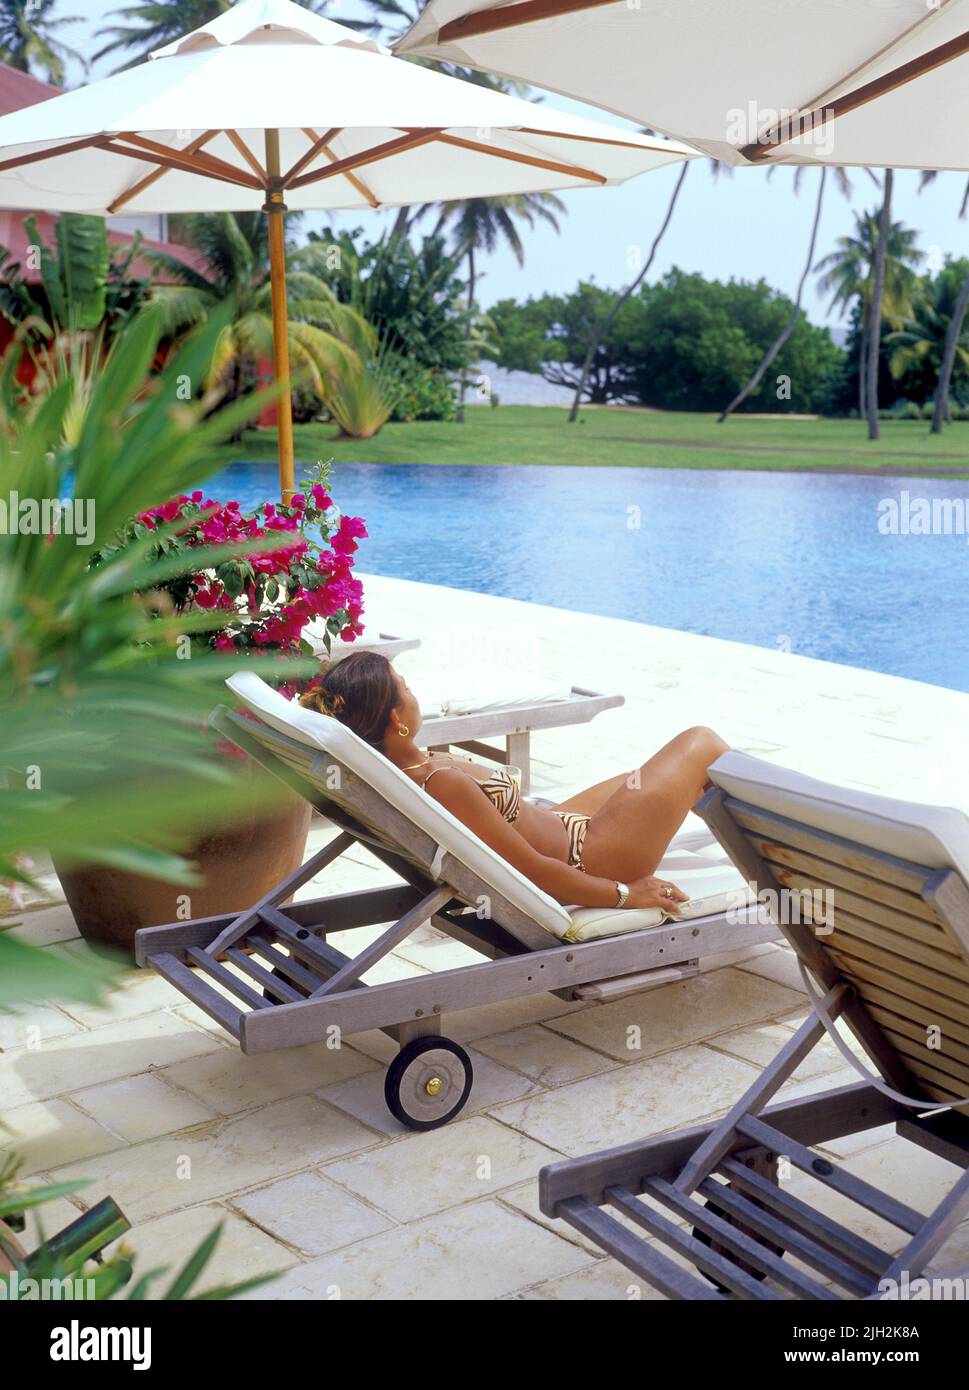 A young French tourist rests poolside at a hotel pool. Cap Est , Martinique, the Caribbean Stock Photo